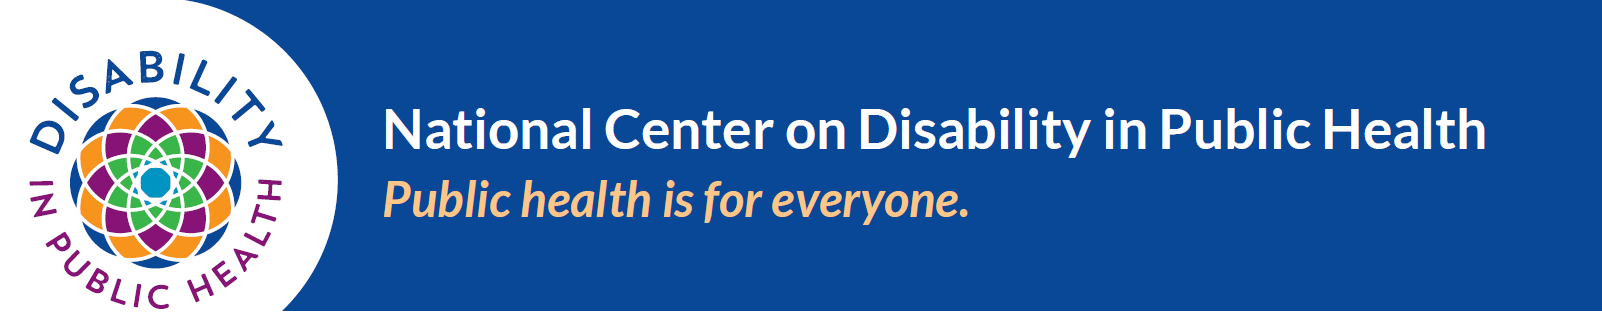 National Center on Disability and Public Health Logo